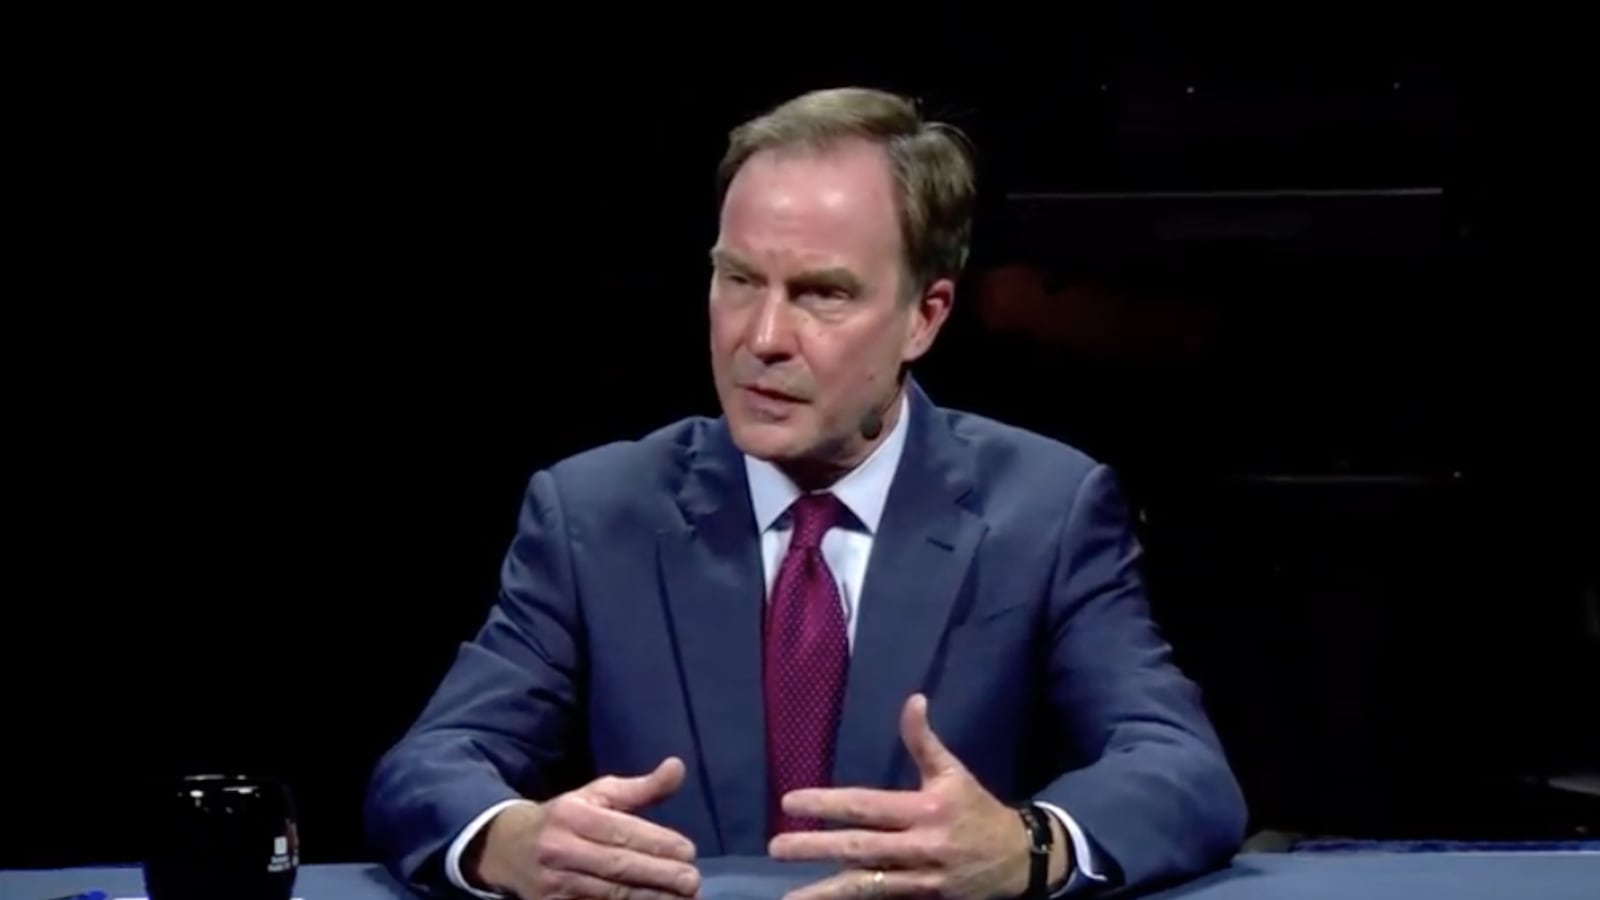 Attorney General Bill Schuette is the GOP nominee for governor in Michigan.